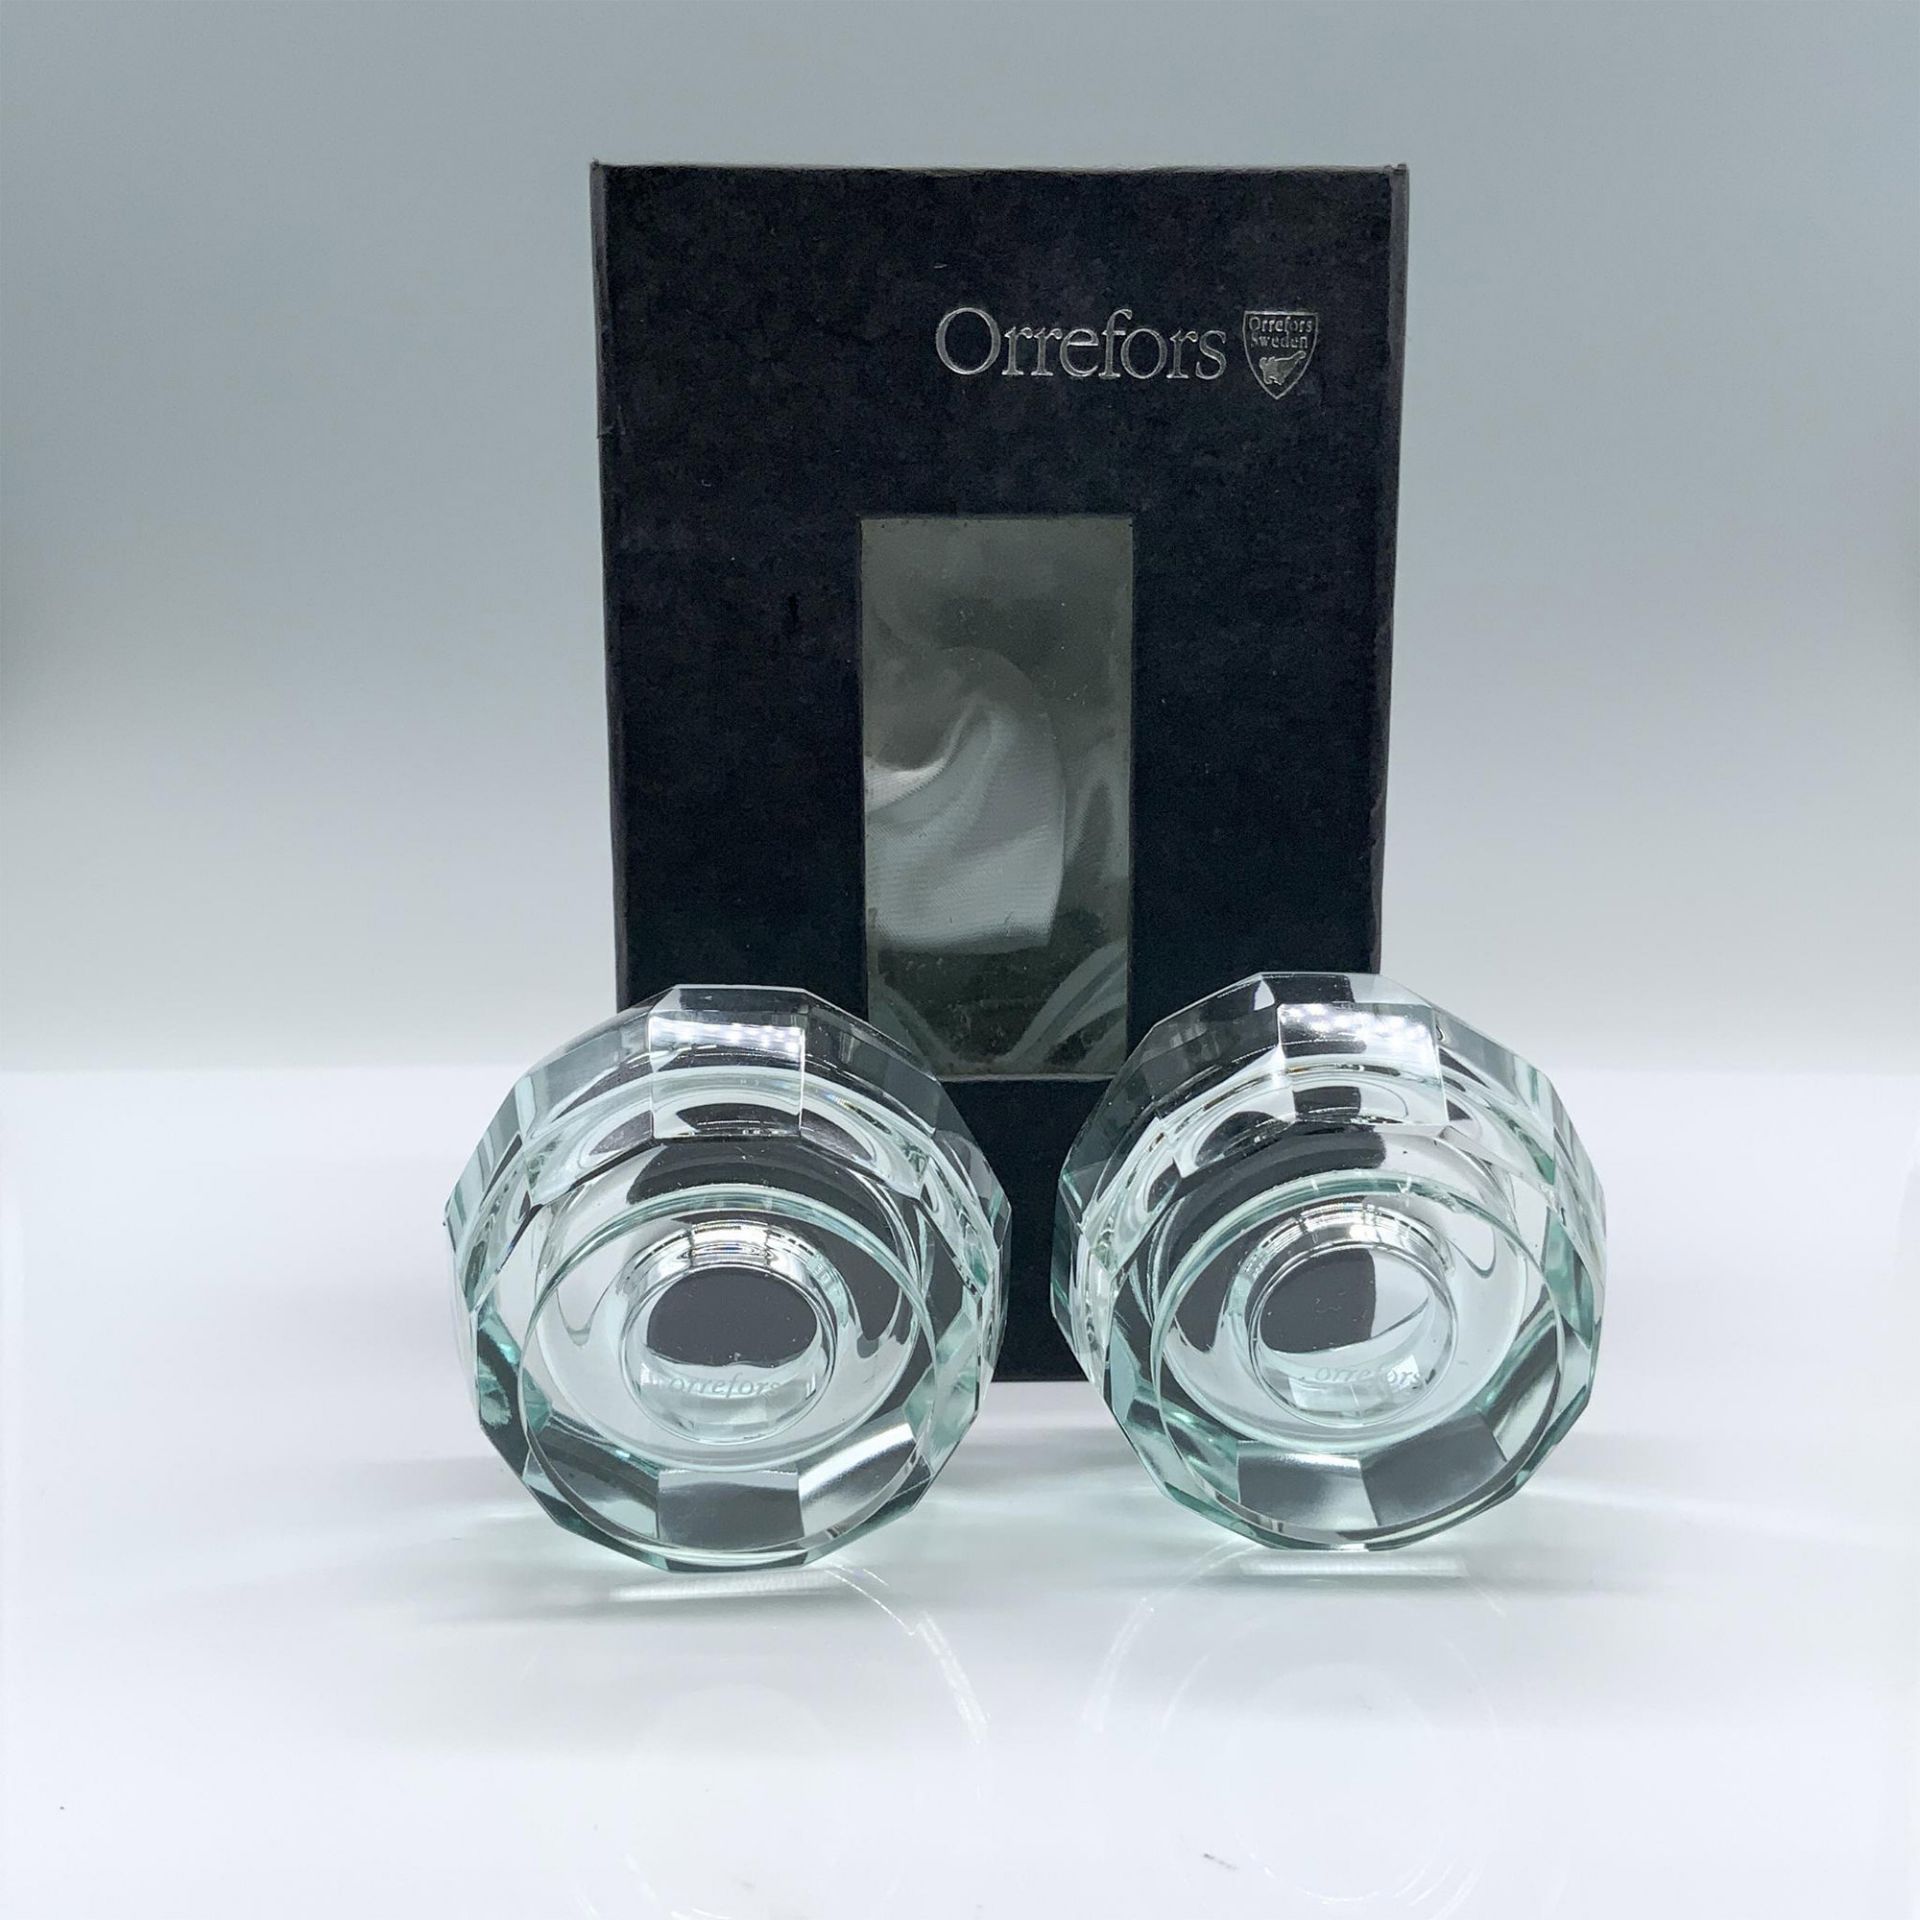 Pair of Orrefors Blue Crystal Totem Harmony Candle Holders - Image 5 of 5